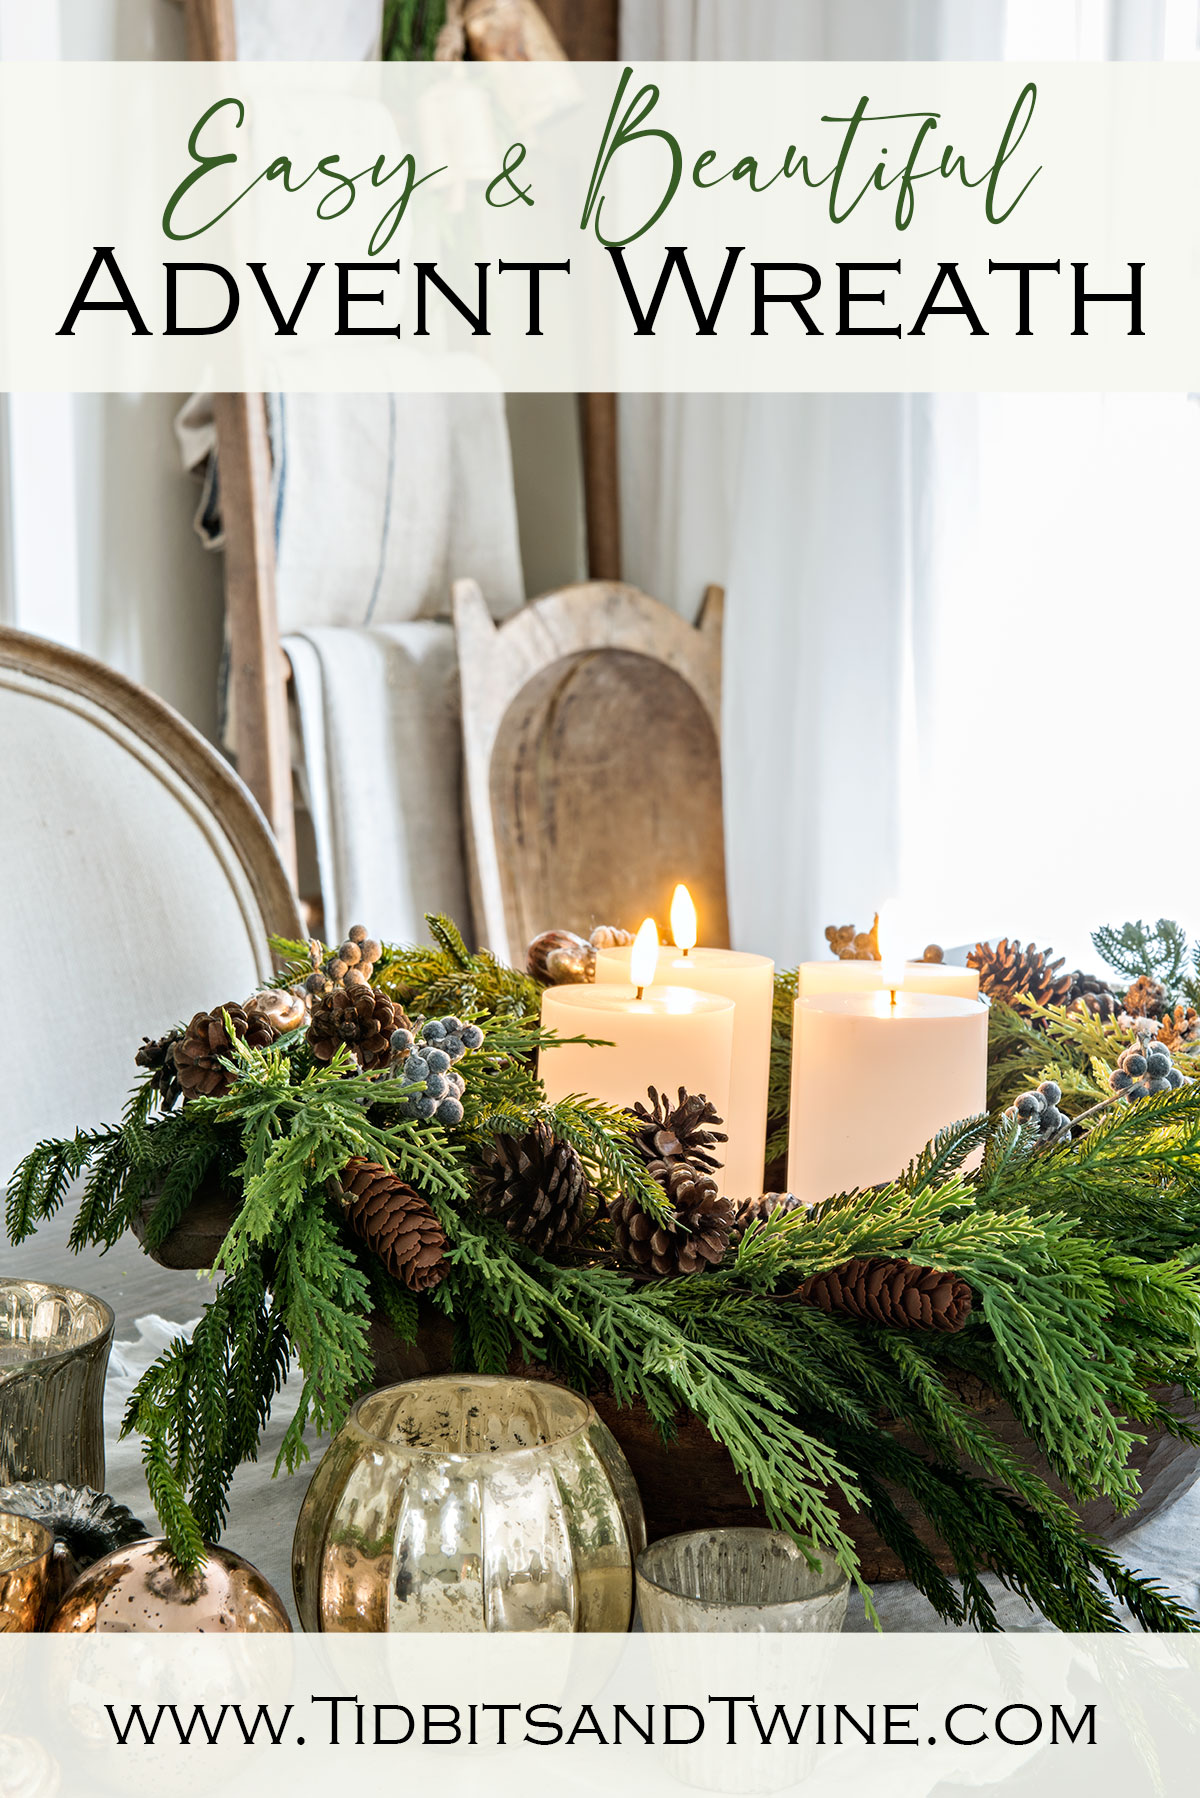 pinterest image for an easy and beautiful advent wreath with image of diy advent wreath on dining table